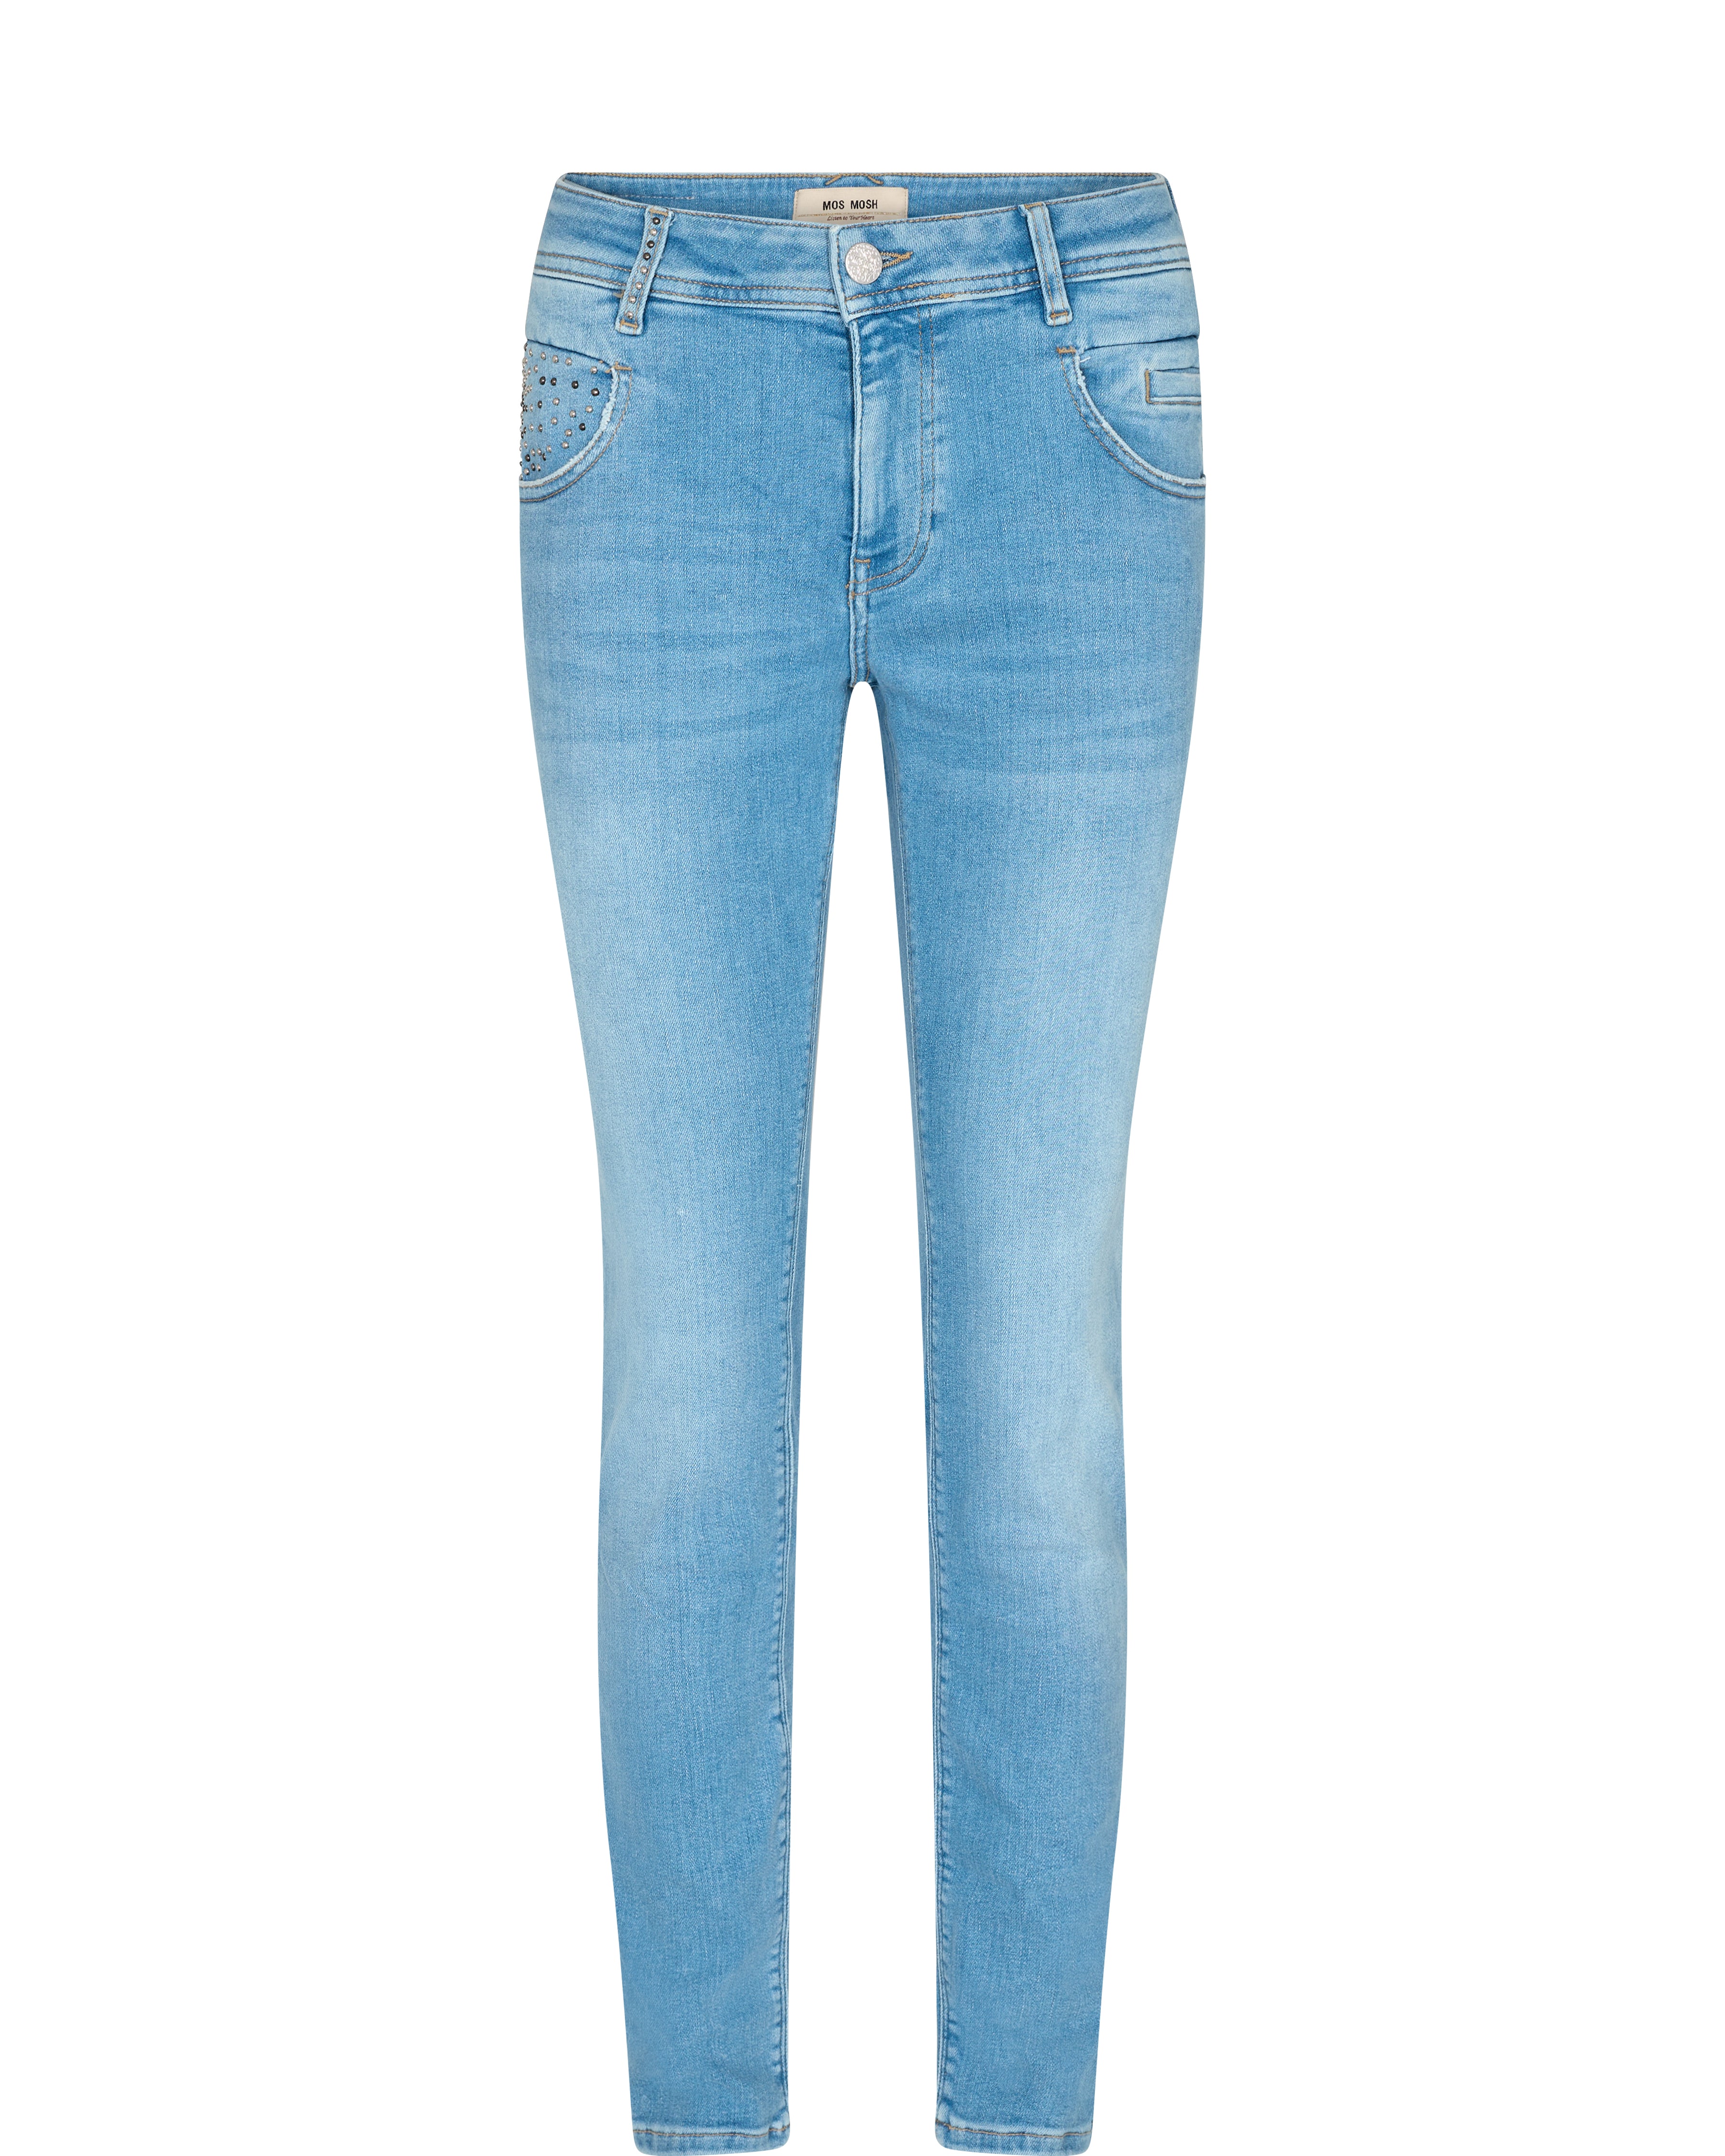 Nelly Trok Jeans, Blue, Jeans fra Mos Mosh